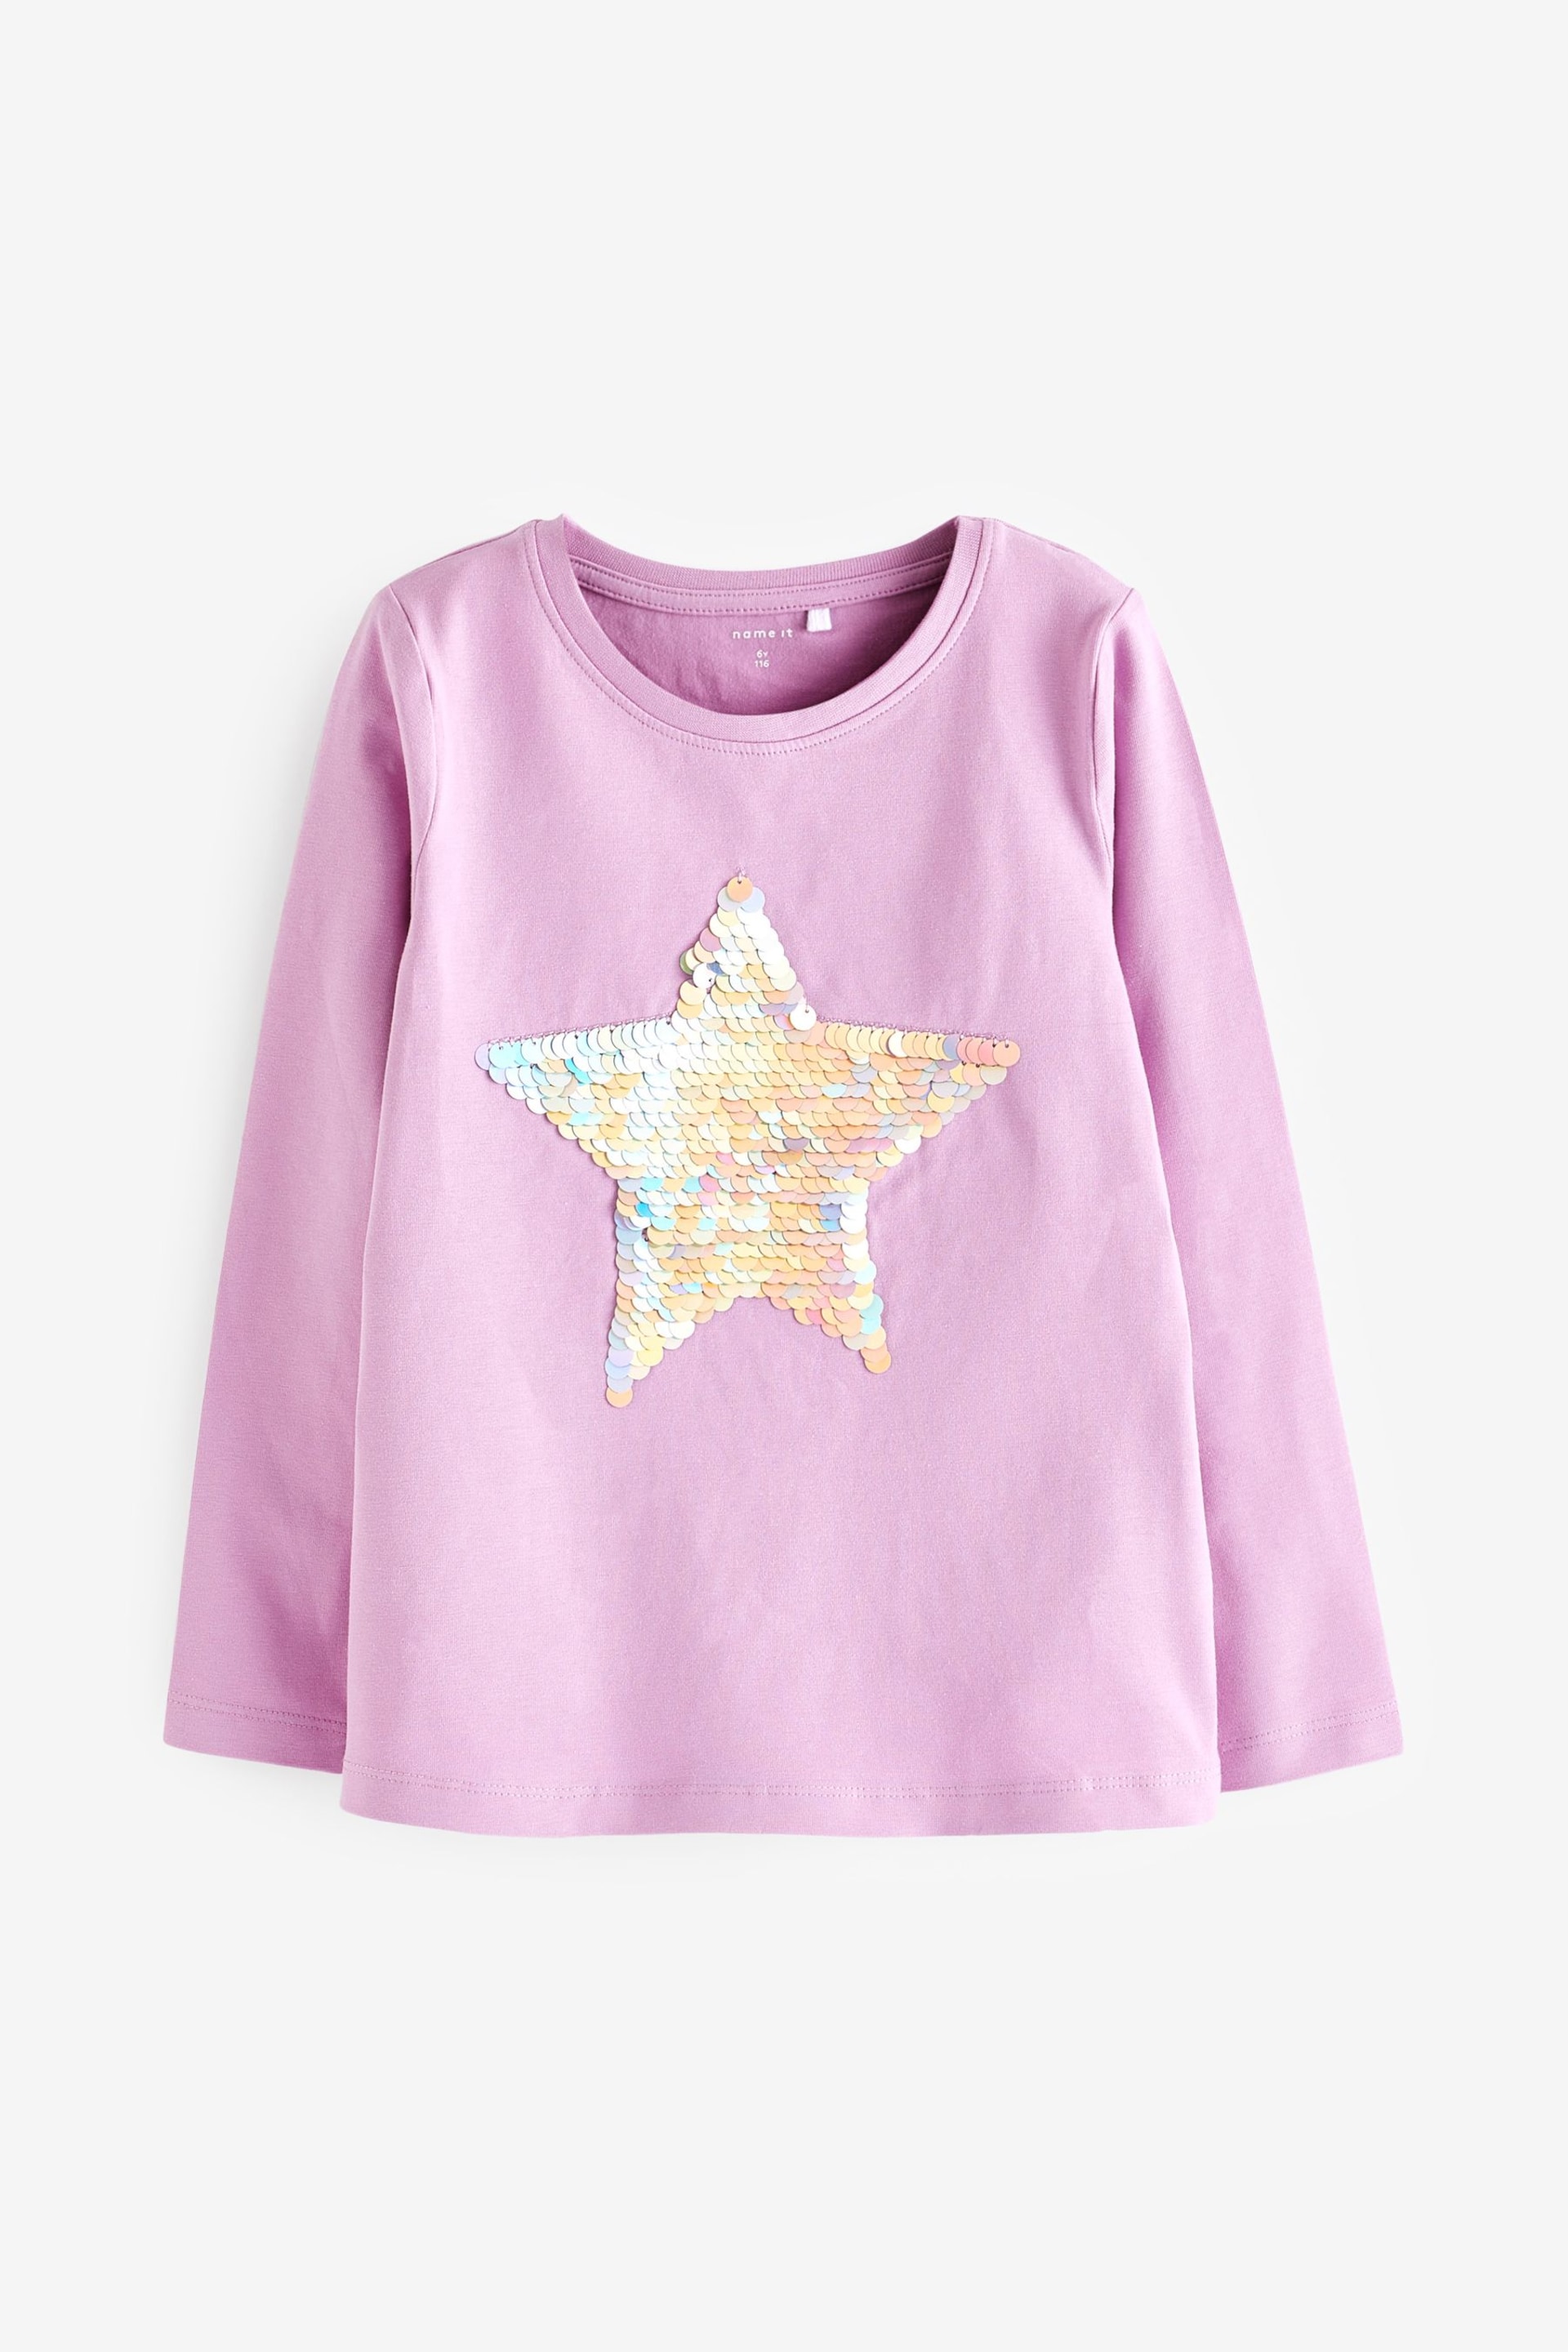 Name It Pink Sequin Star Top - Image 2 of 4